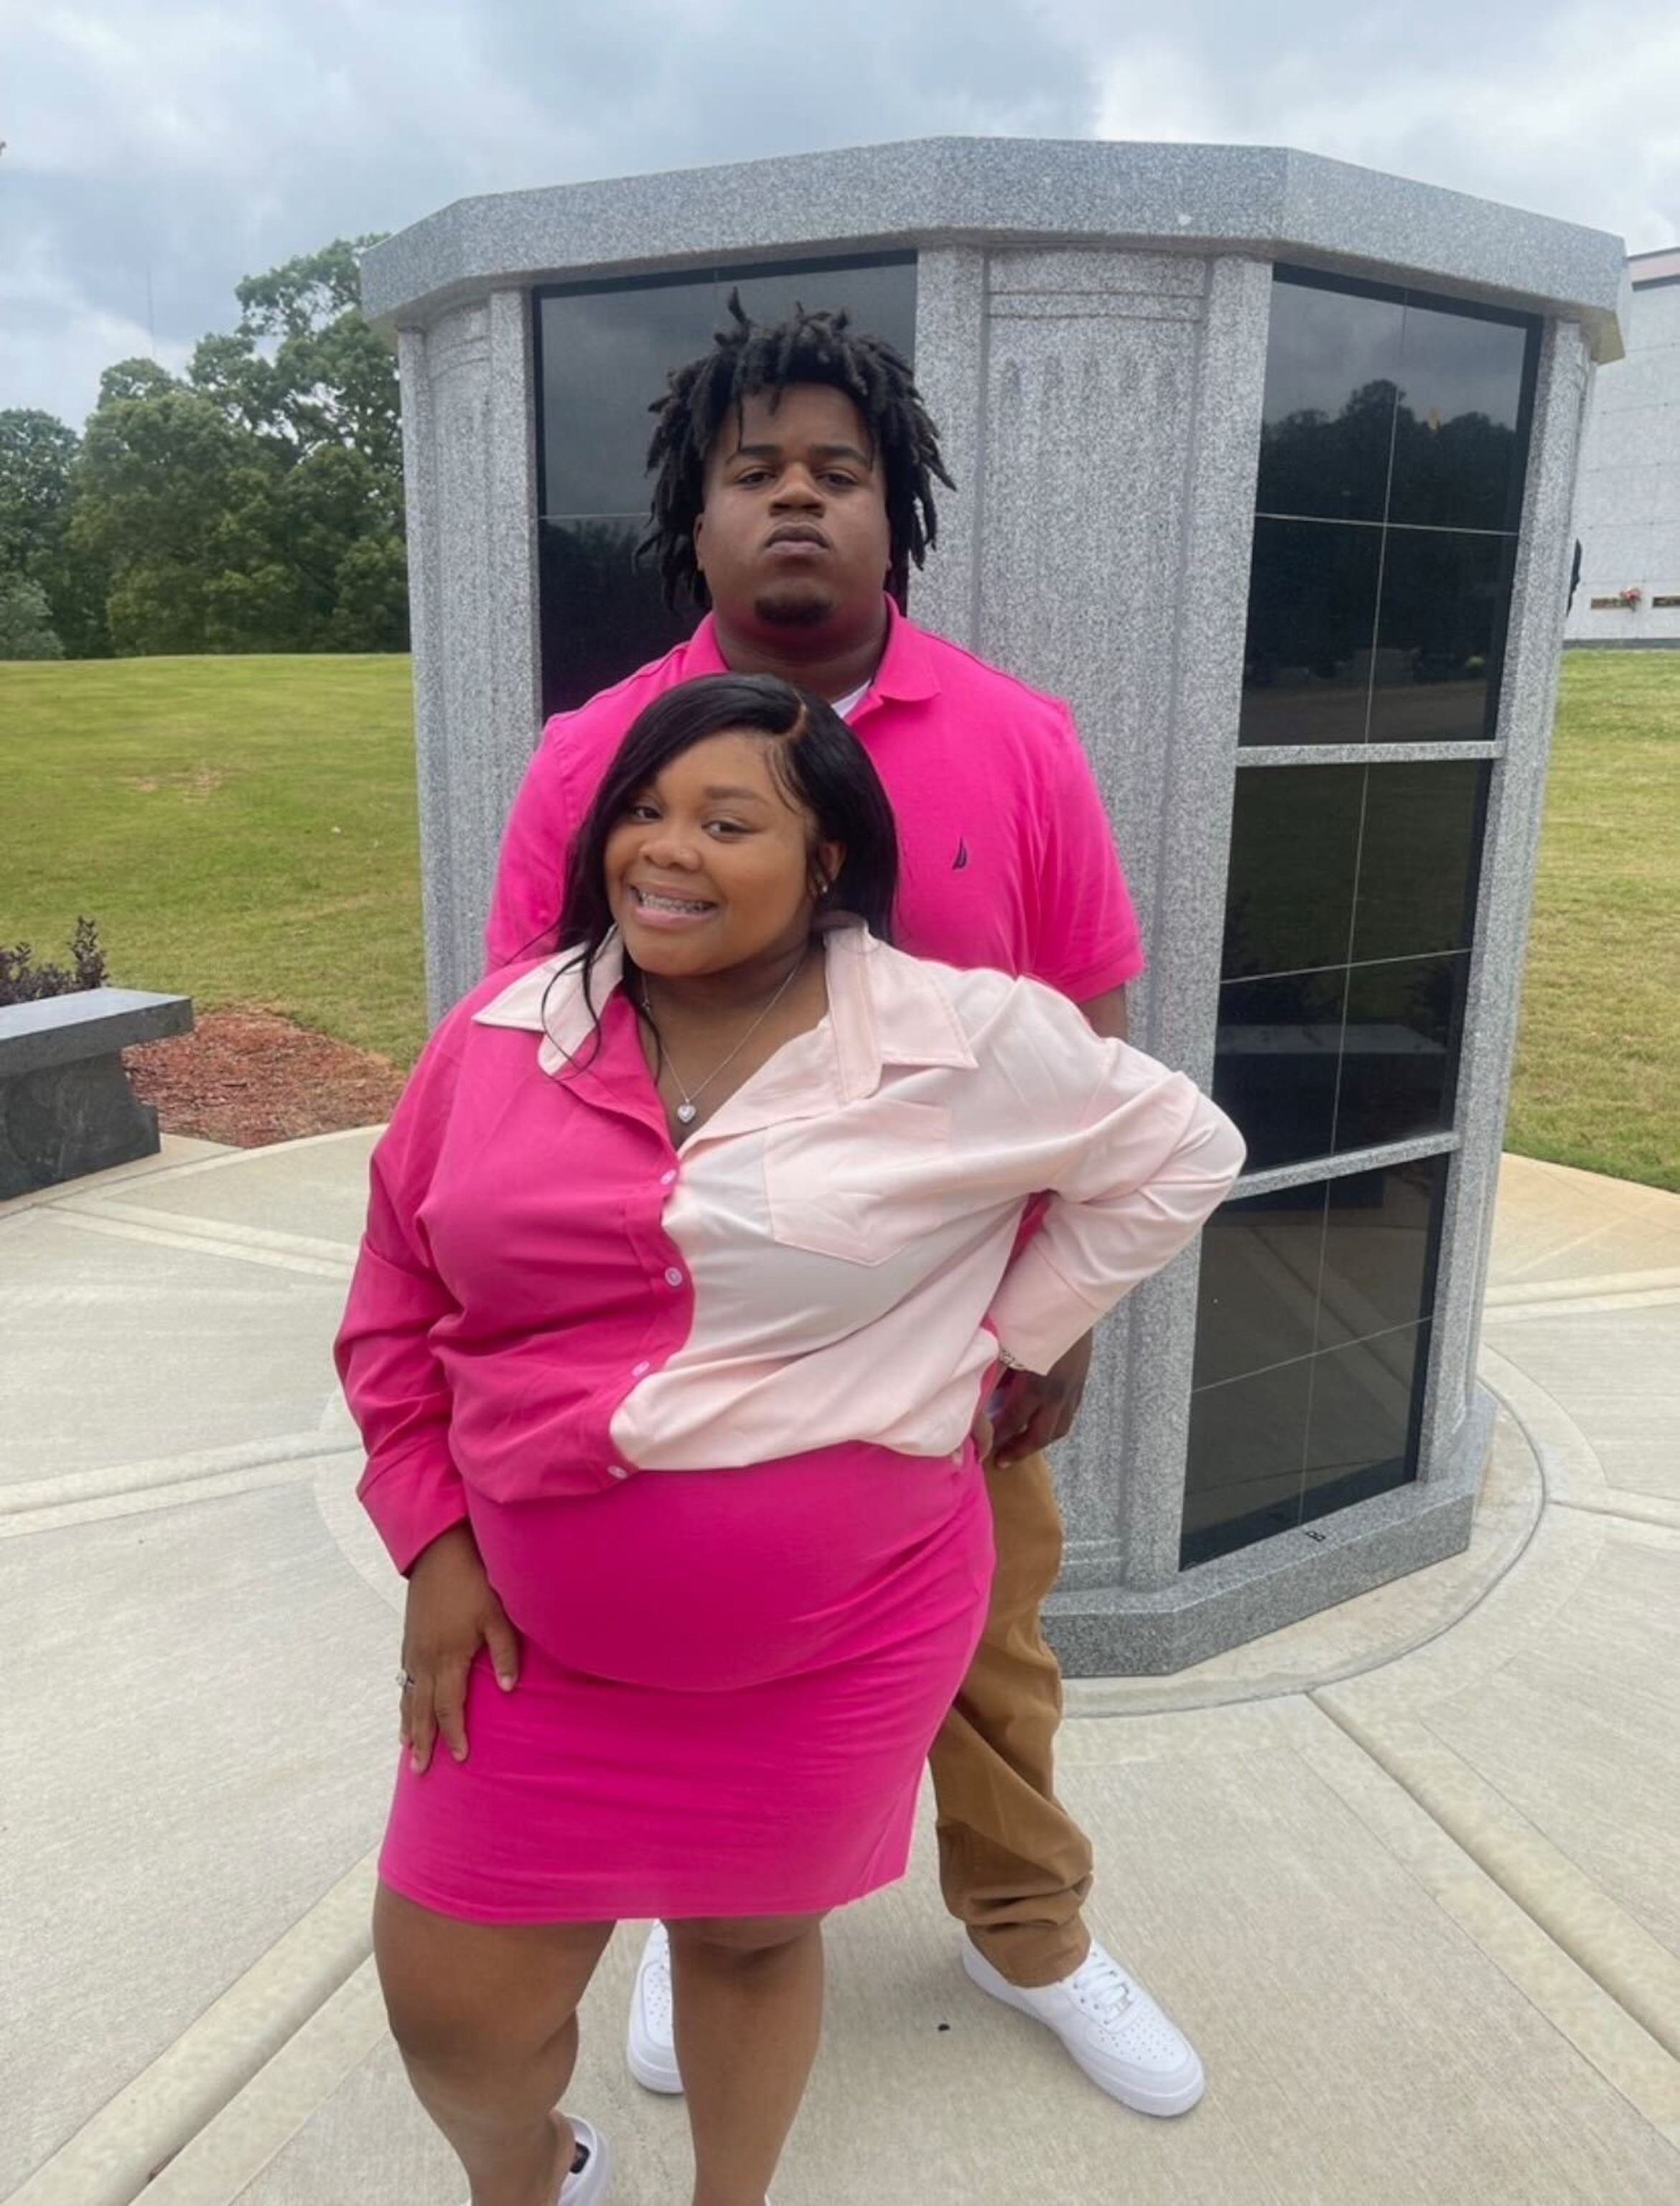 PHOTO: Jessica Ross and her boyfriend Treveon Taylor, Sr. didn't know their son died of decapitation during his birth until three days after the incident, according to the family lawyers.